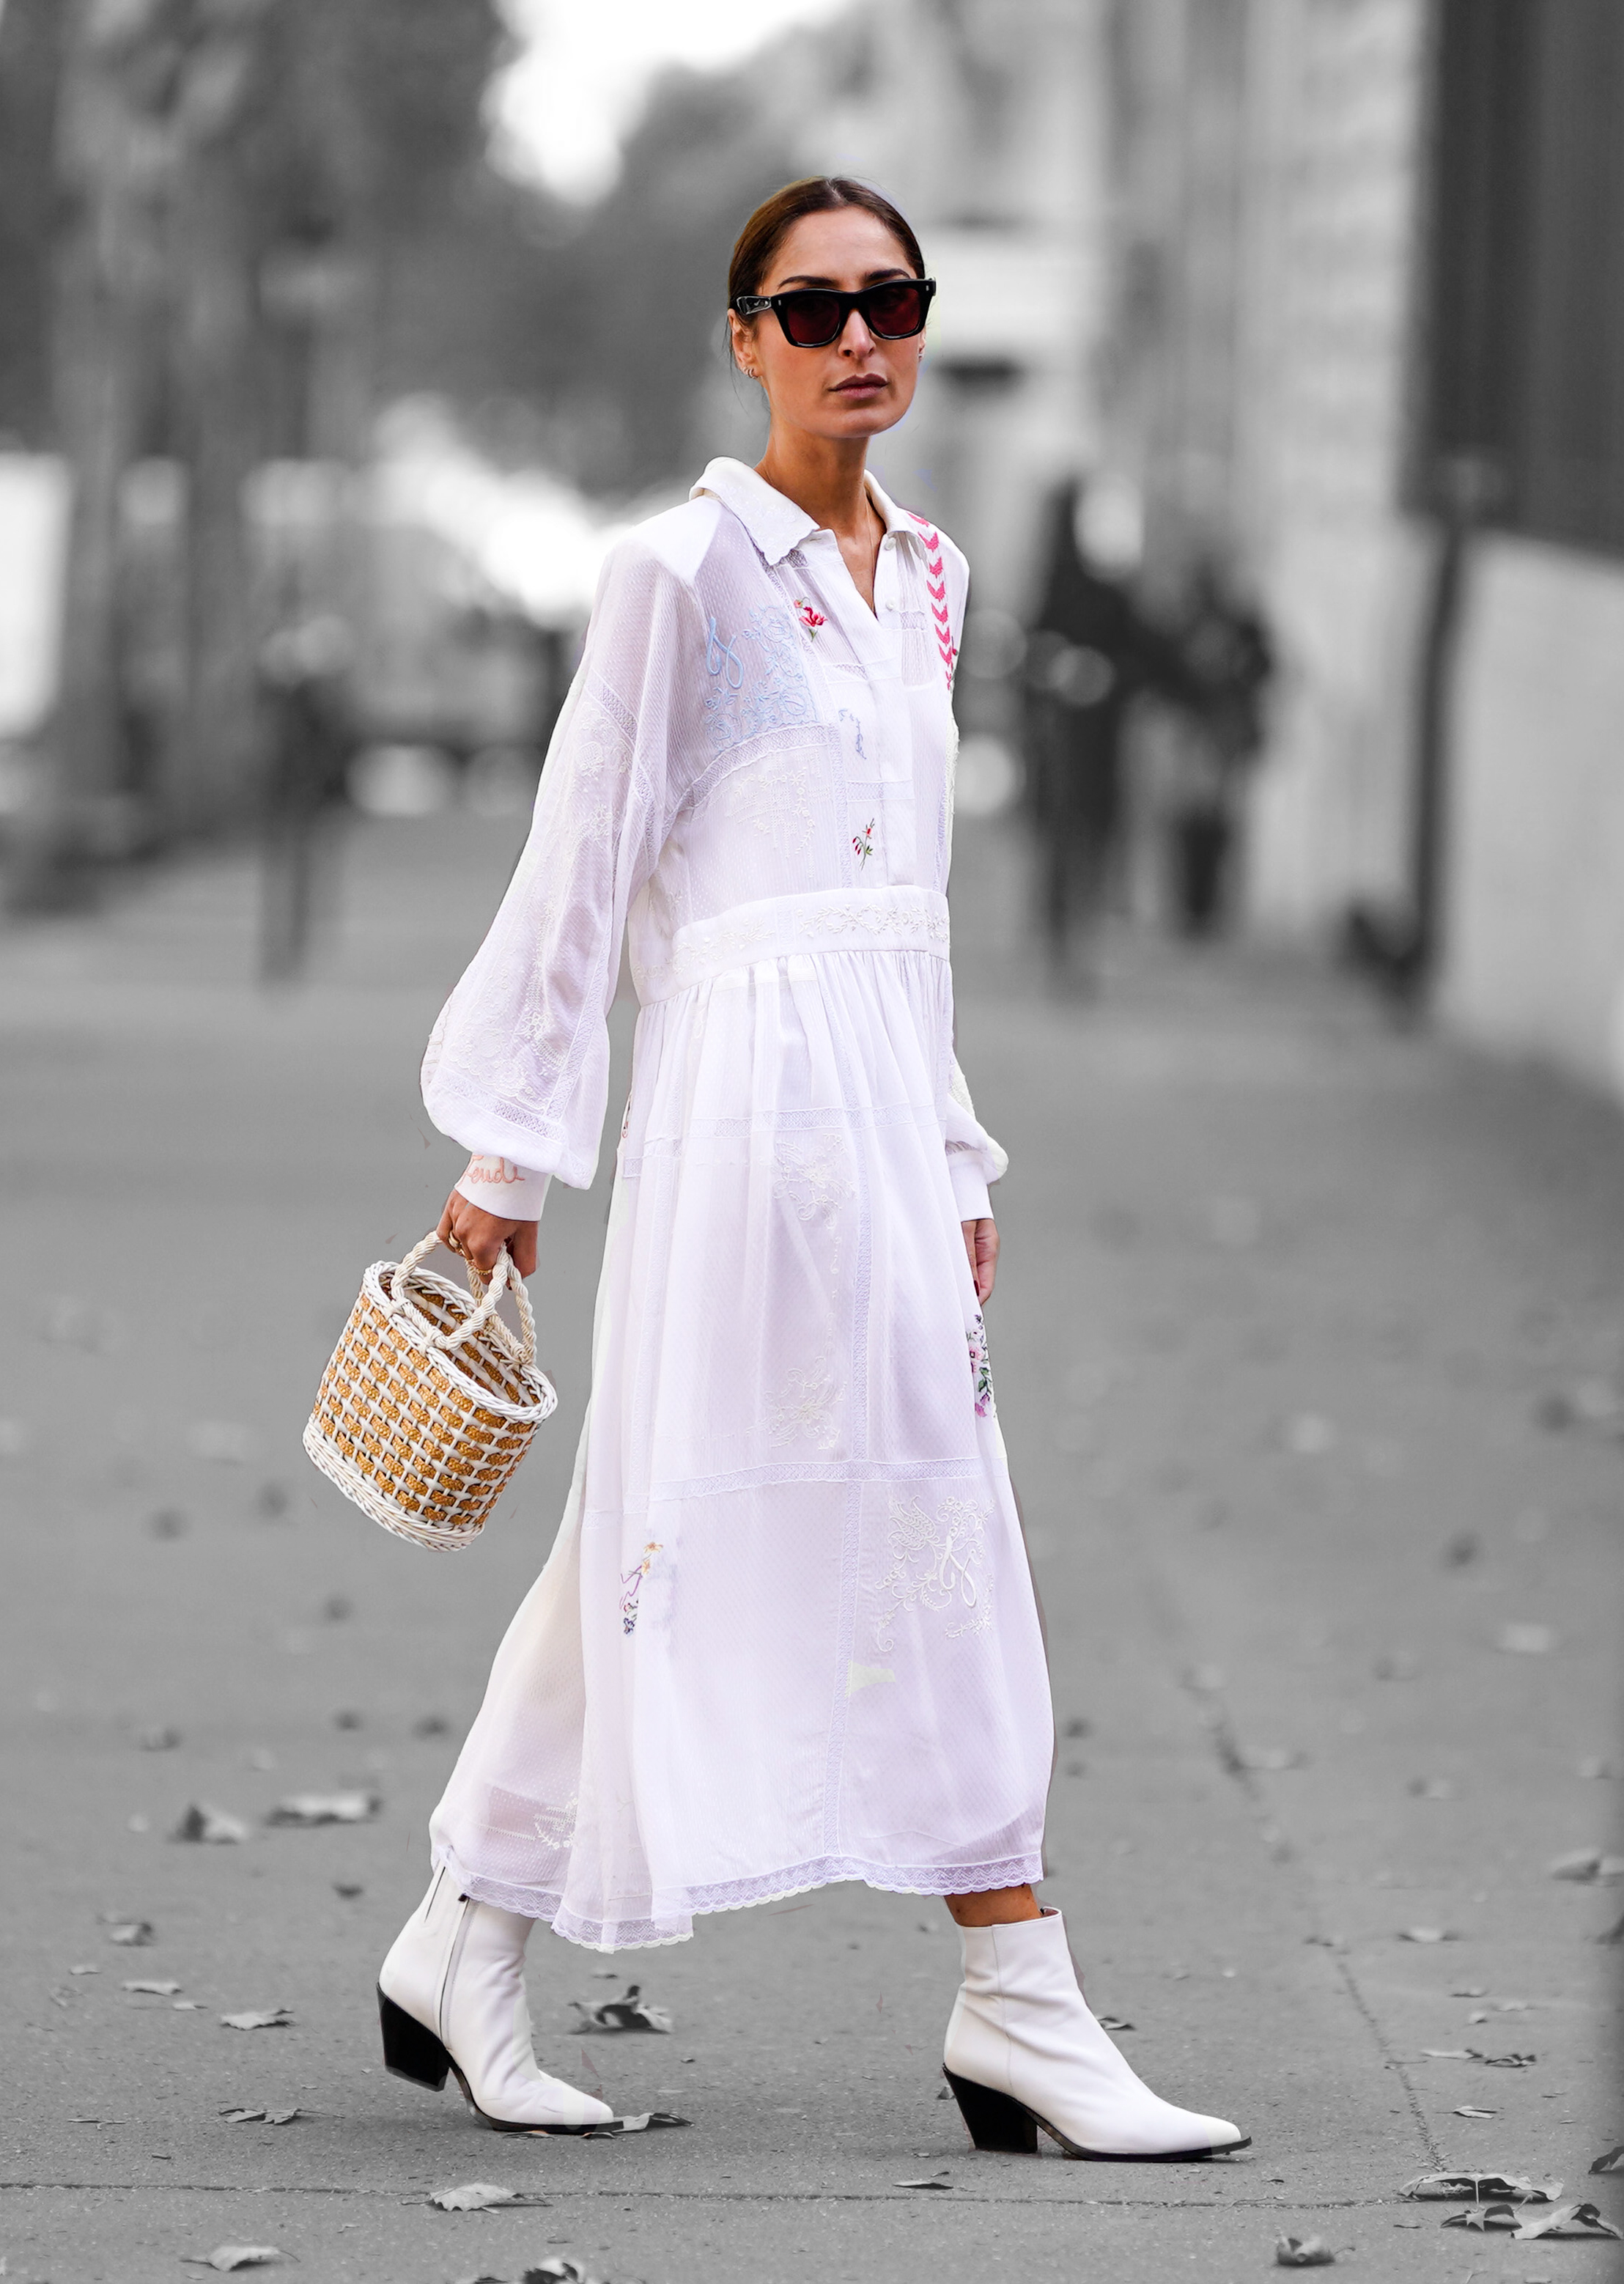 The Little White Dress: 3 Takes on This Summer Essential